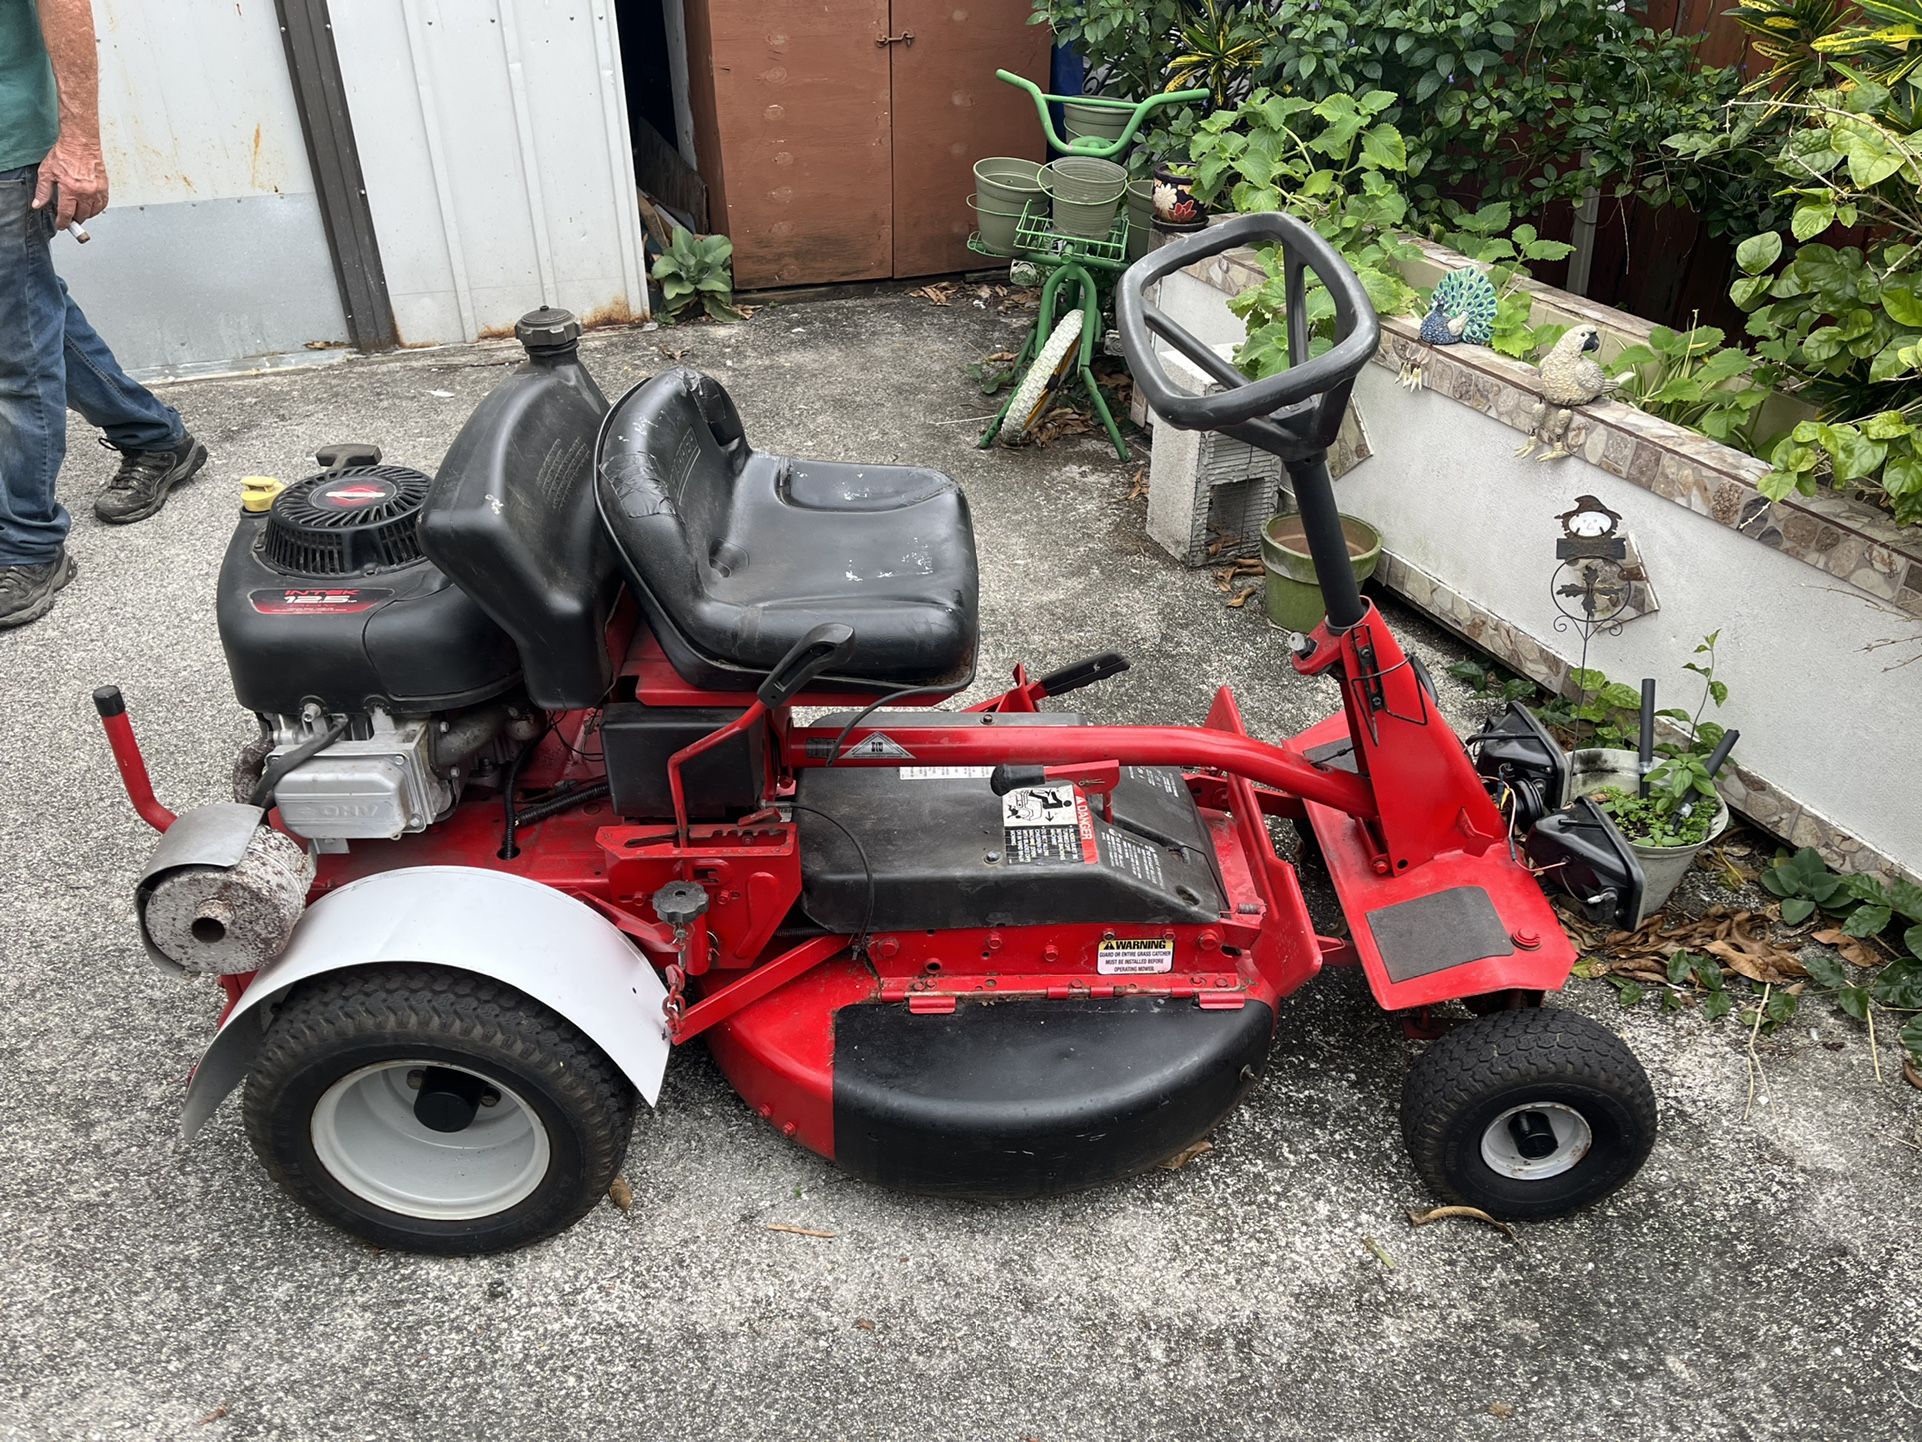 Snapper Lawn Tractor 